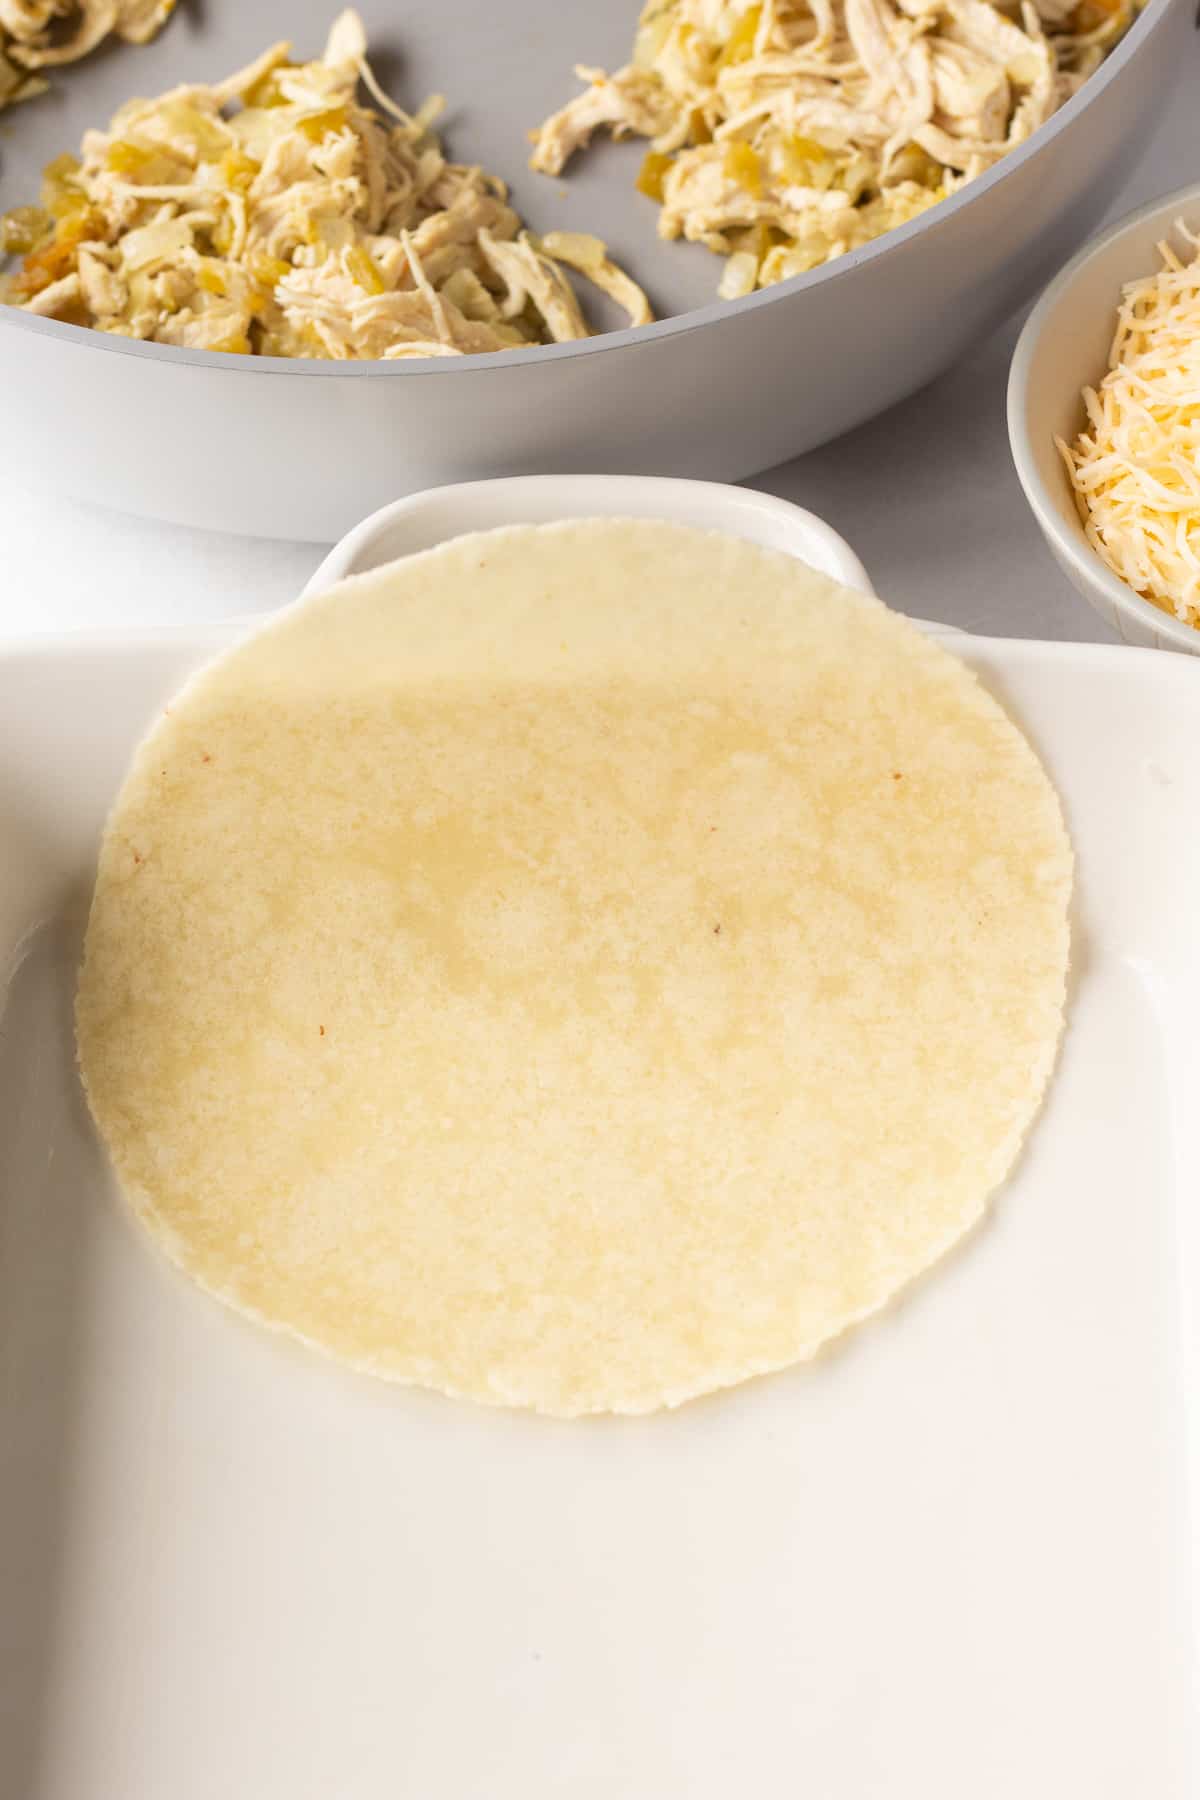 a paleo tortilla resting in one end of a white casserole dish.